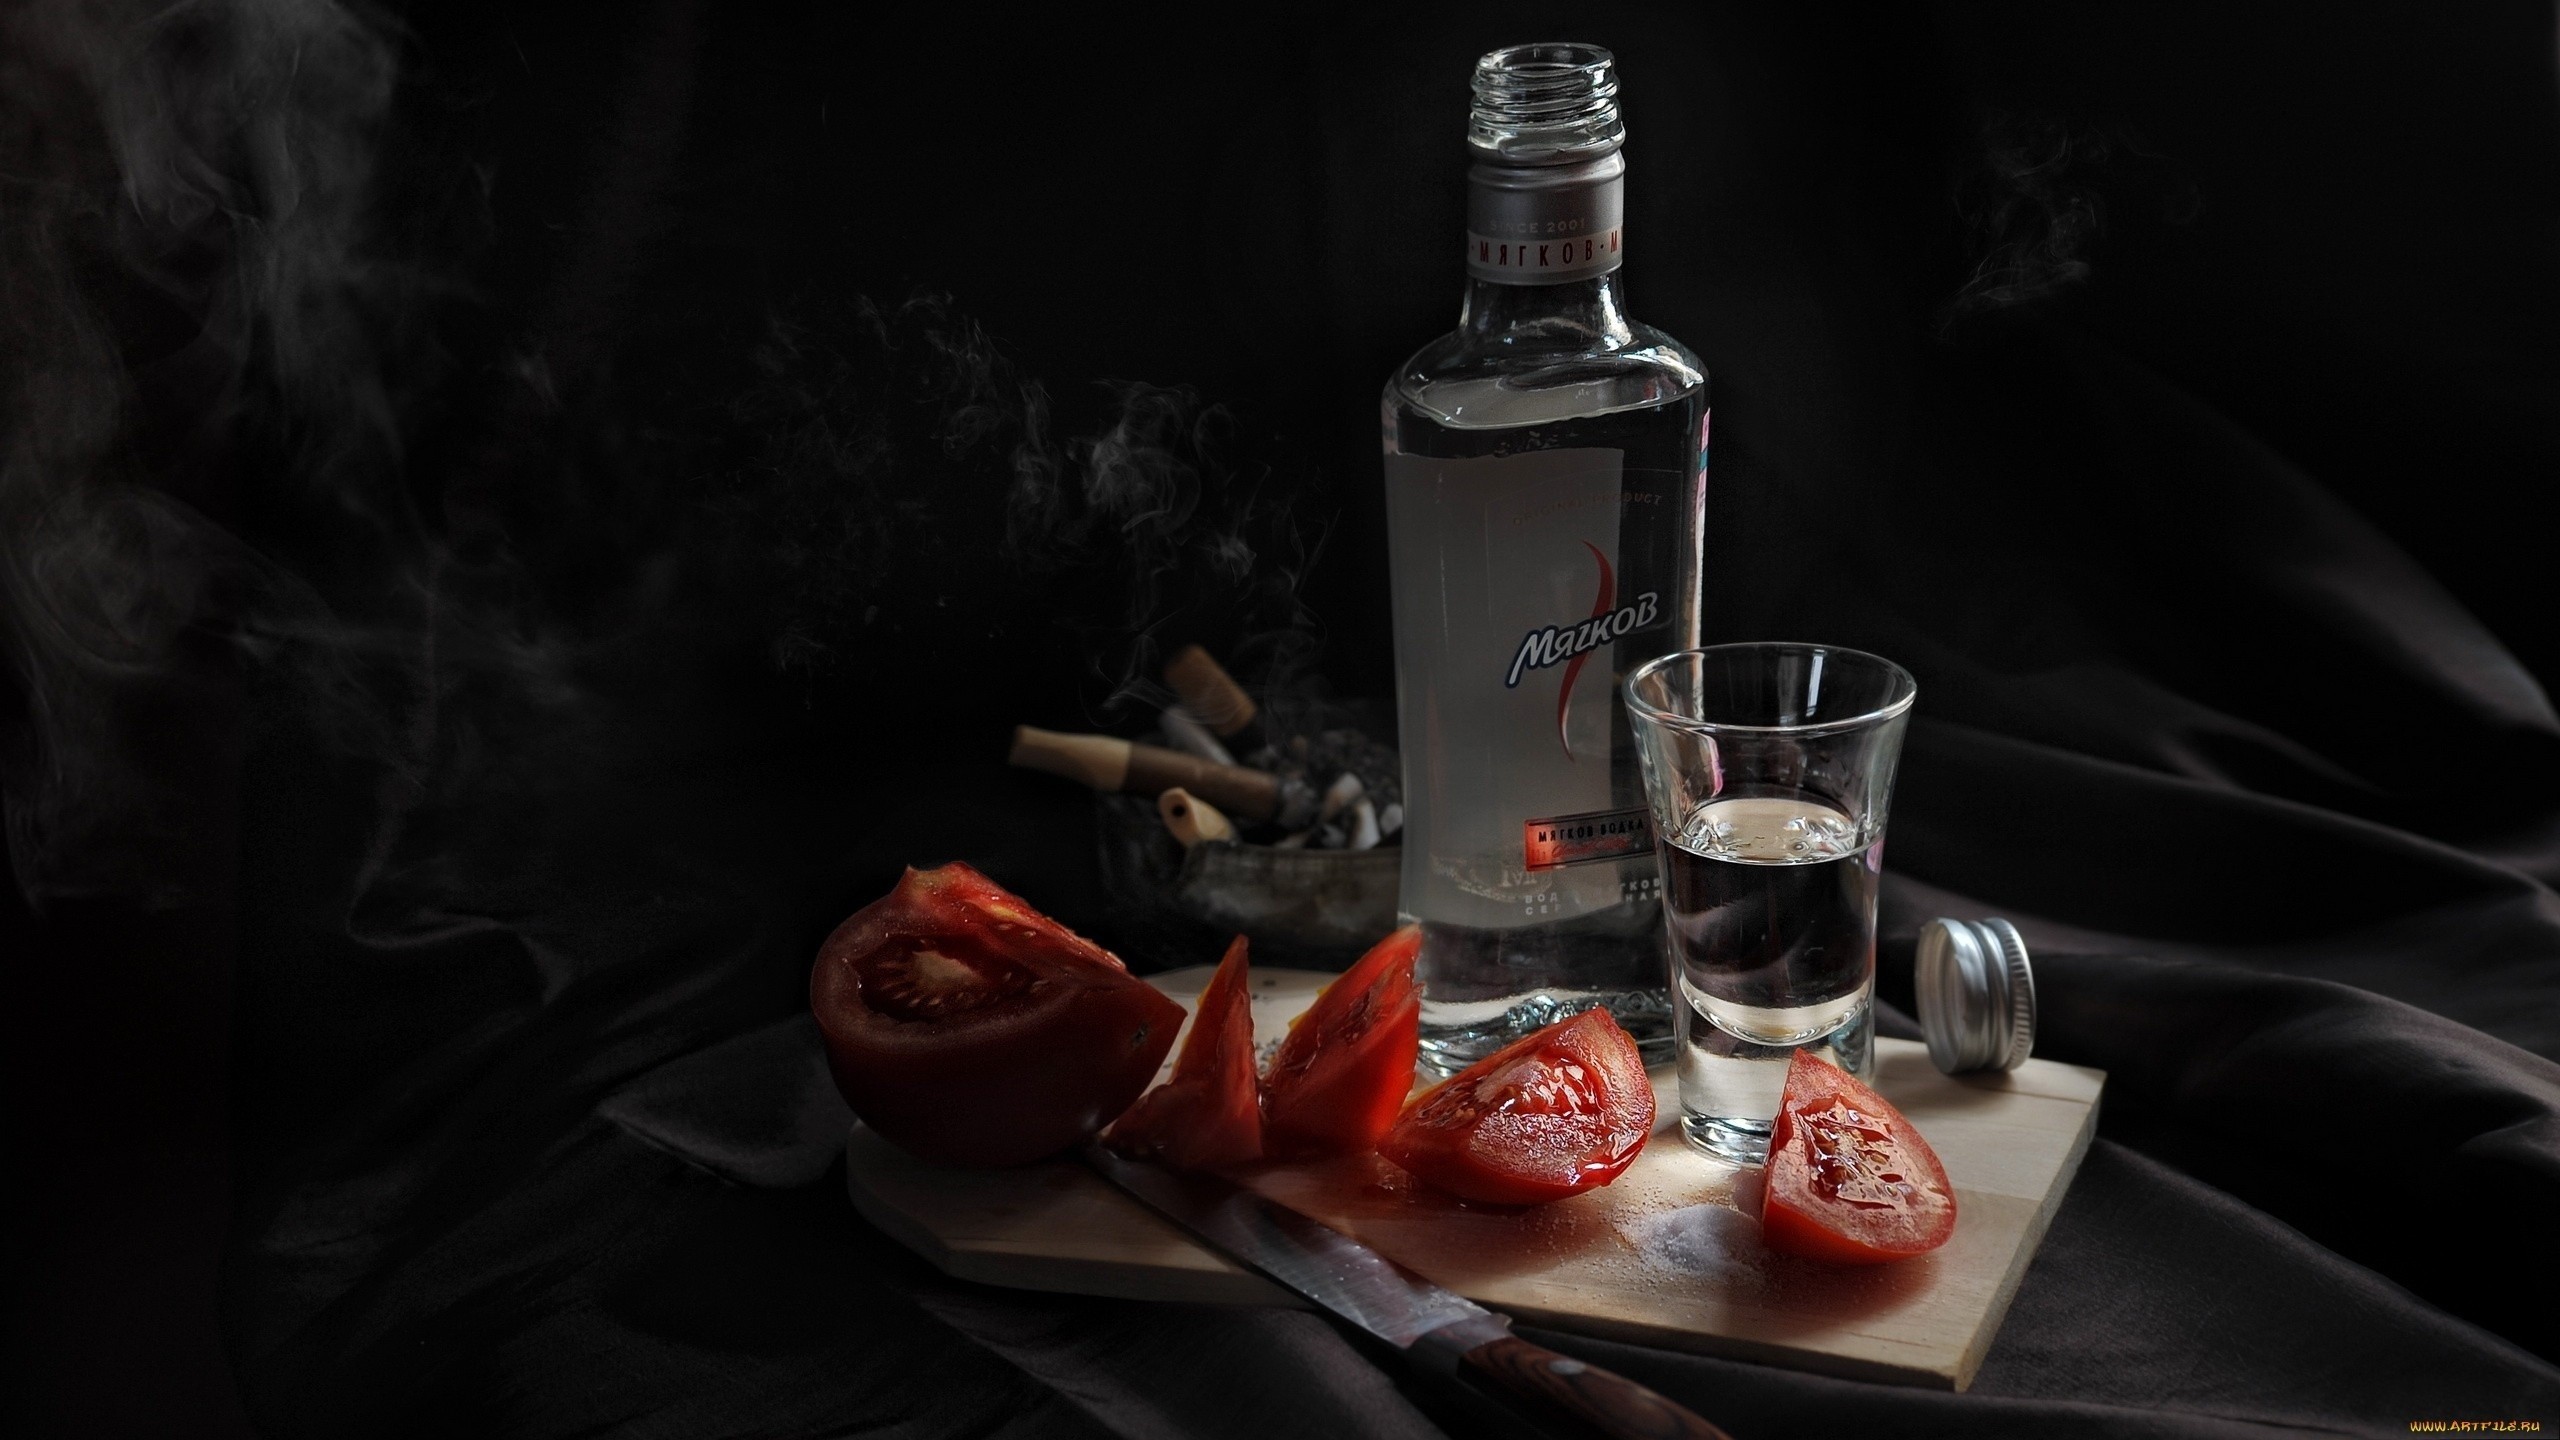 Lunch Alcohol Tomatoes Knives Bottles 2560x1440